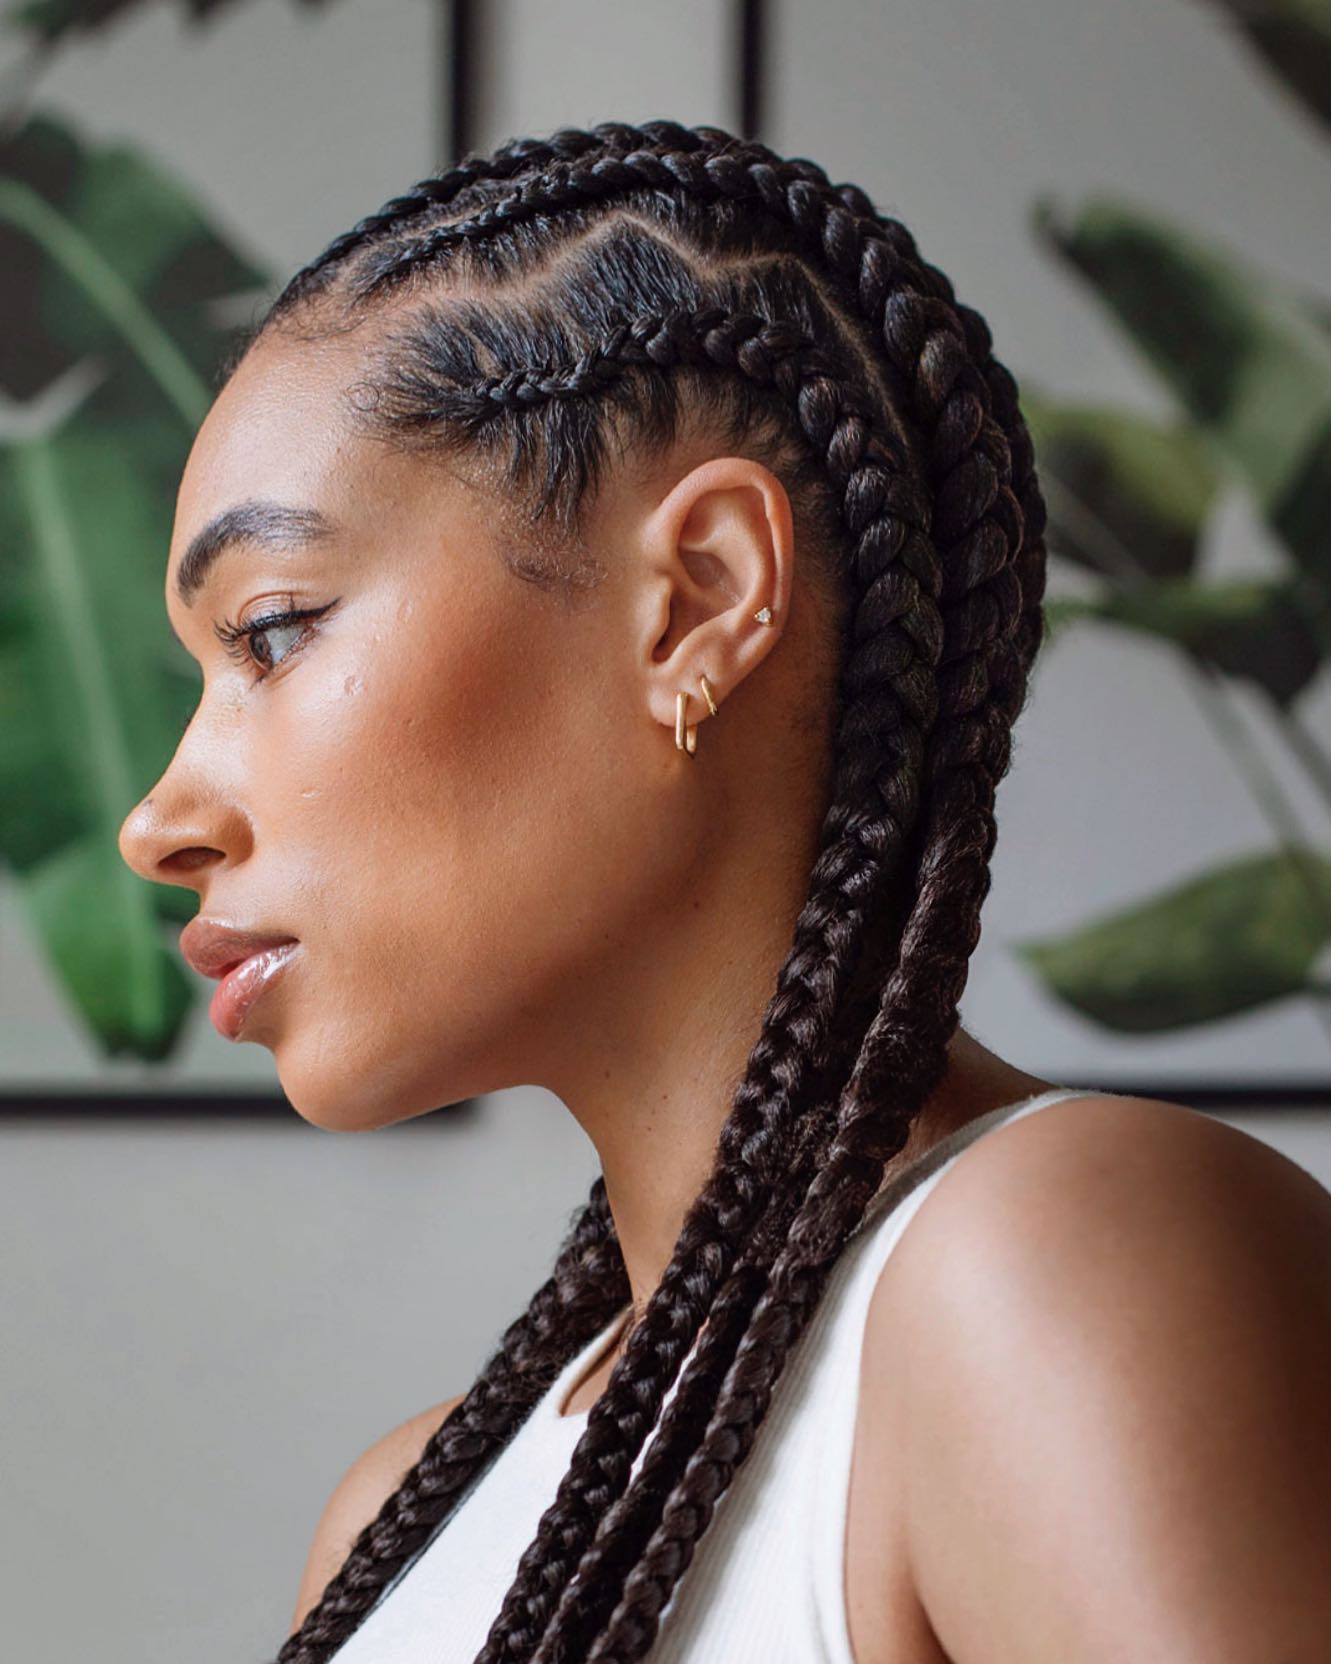 protective hairstyles for black women